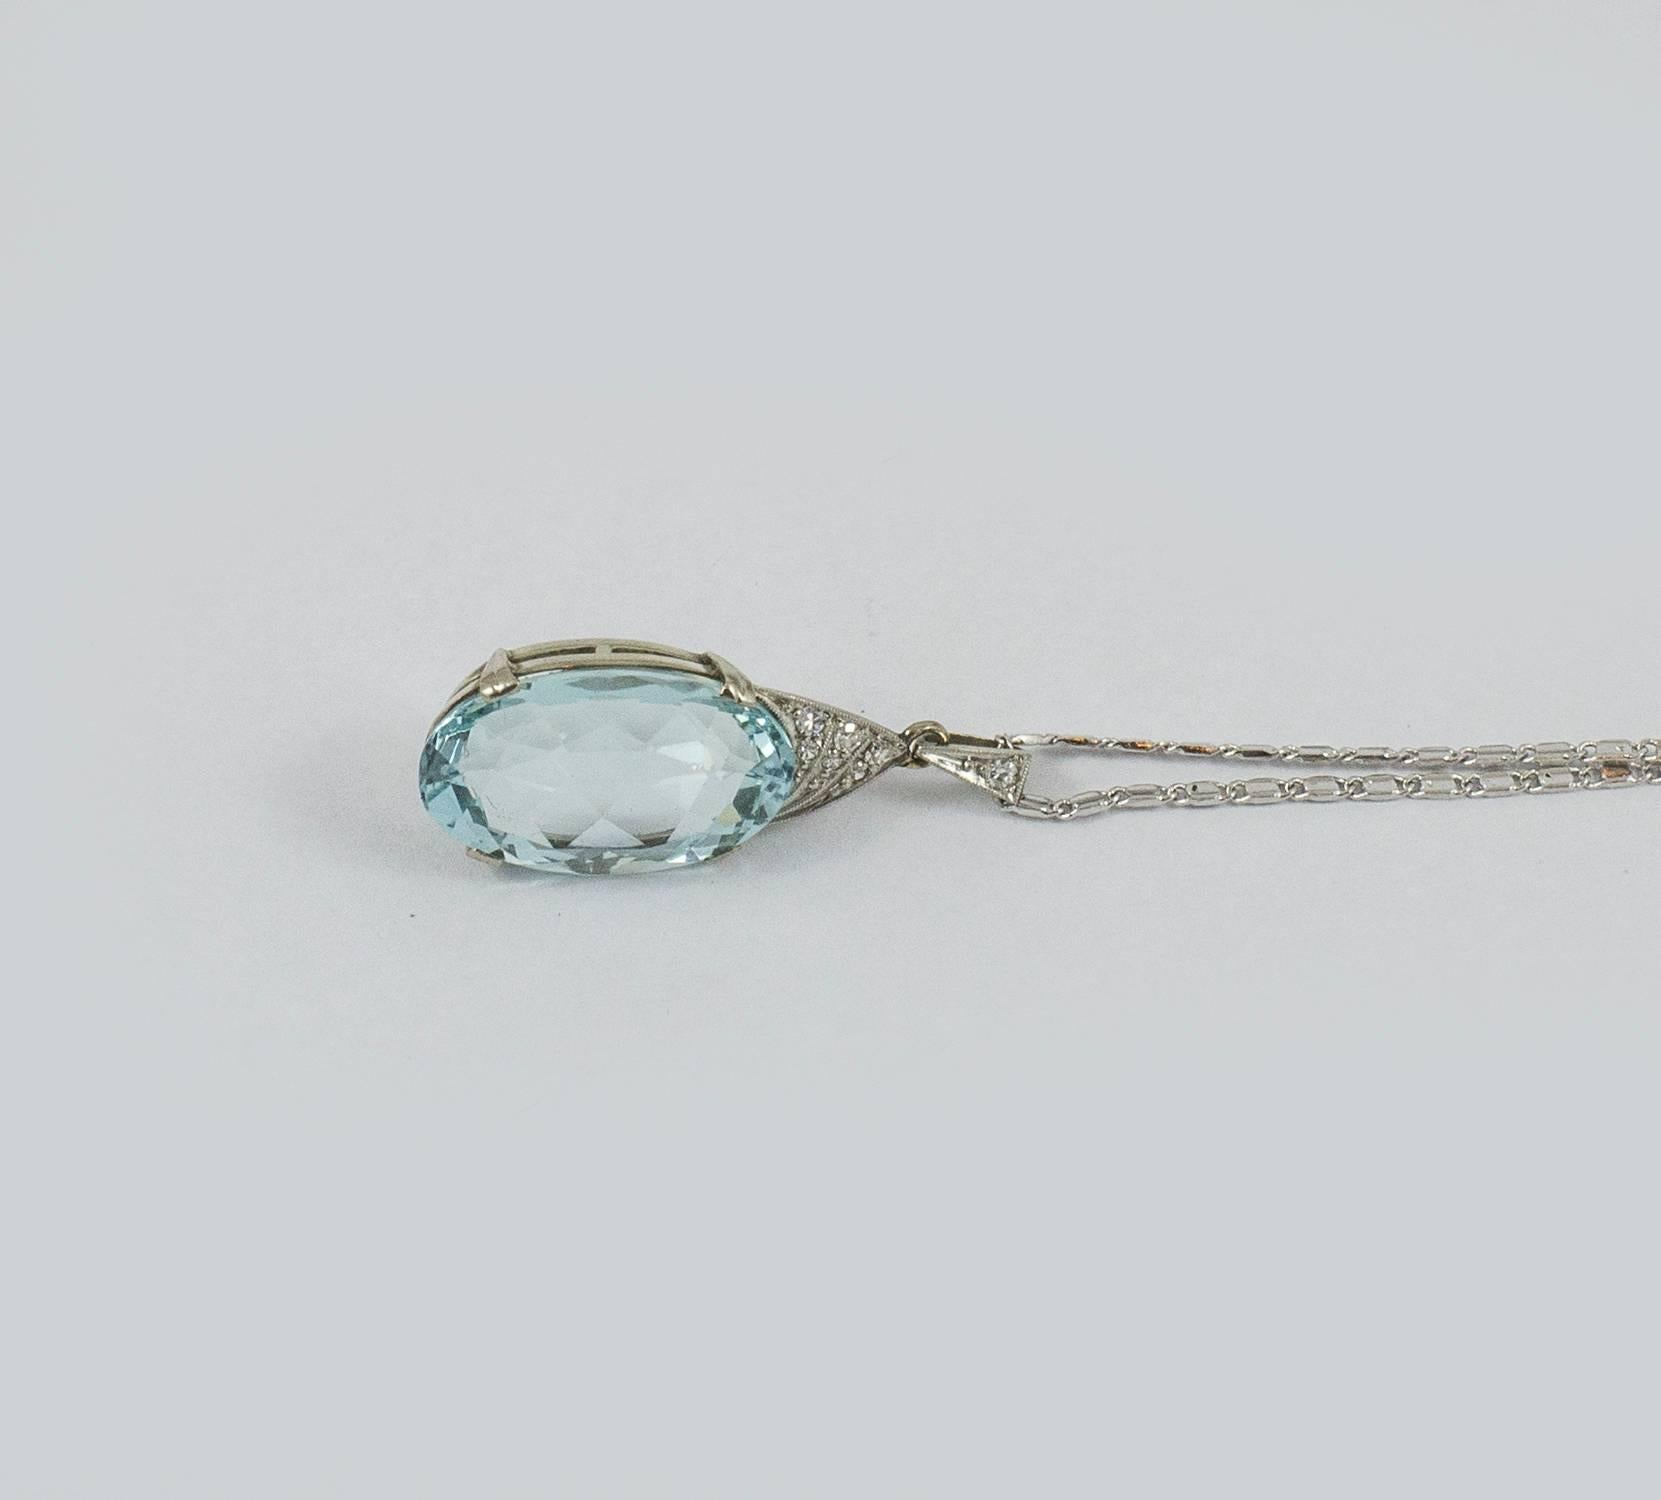 A delicate Art Nuveau aquamarine necklace. The faceted oval aquamarine weighs 10.80 ct and is set in 14kt white gold with fine diamond detail. This refined pendant is accompanied by a white gold chain measuring 18 inches. It is in excellent